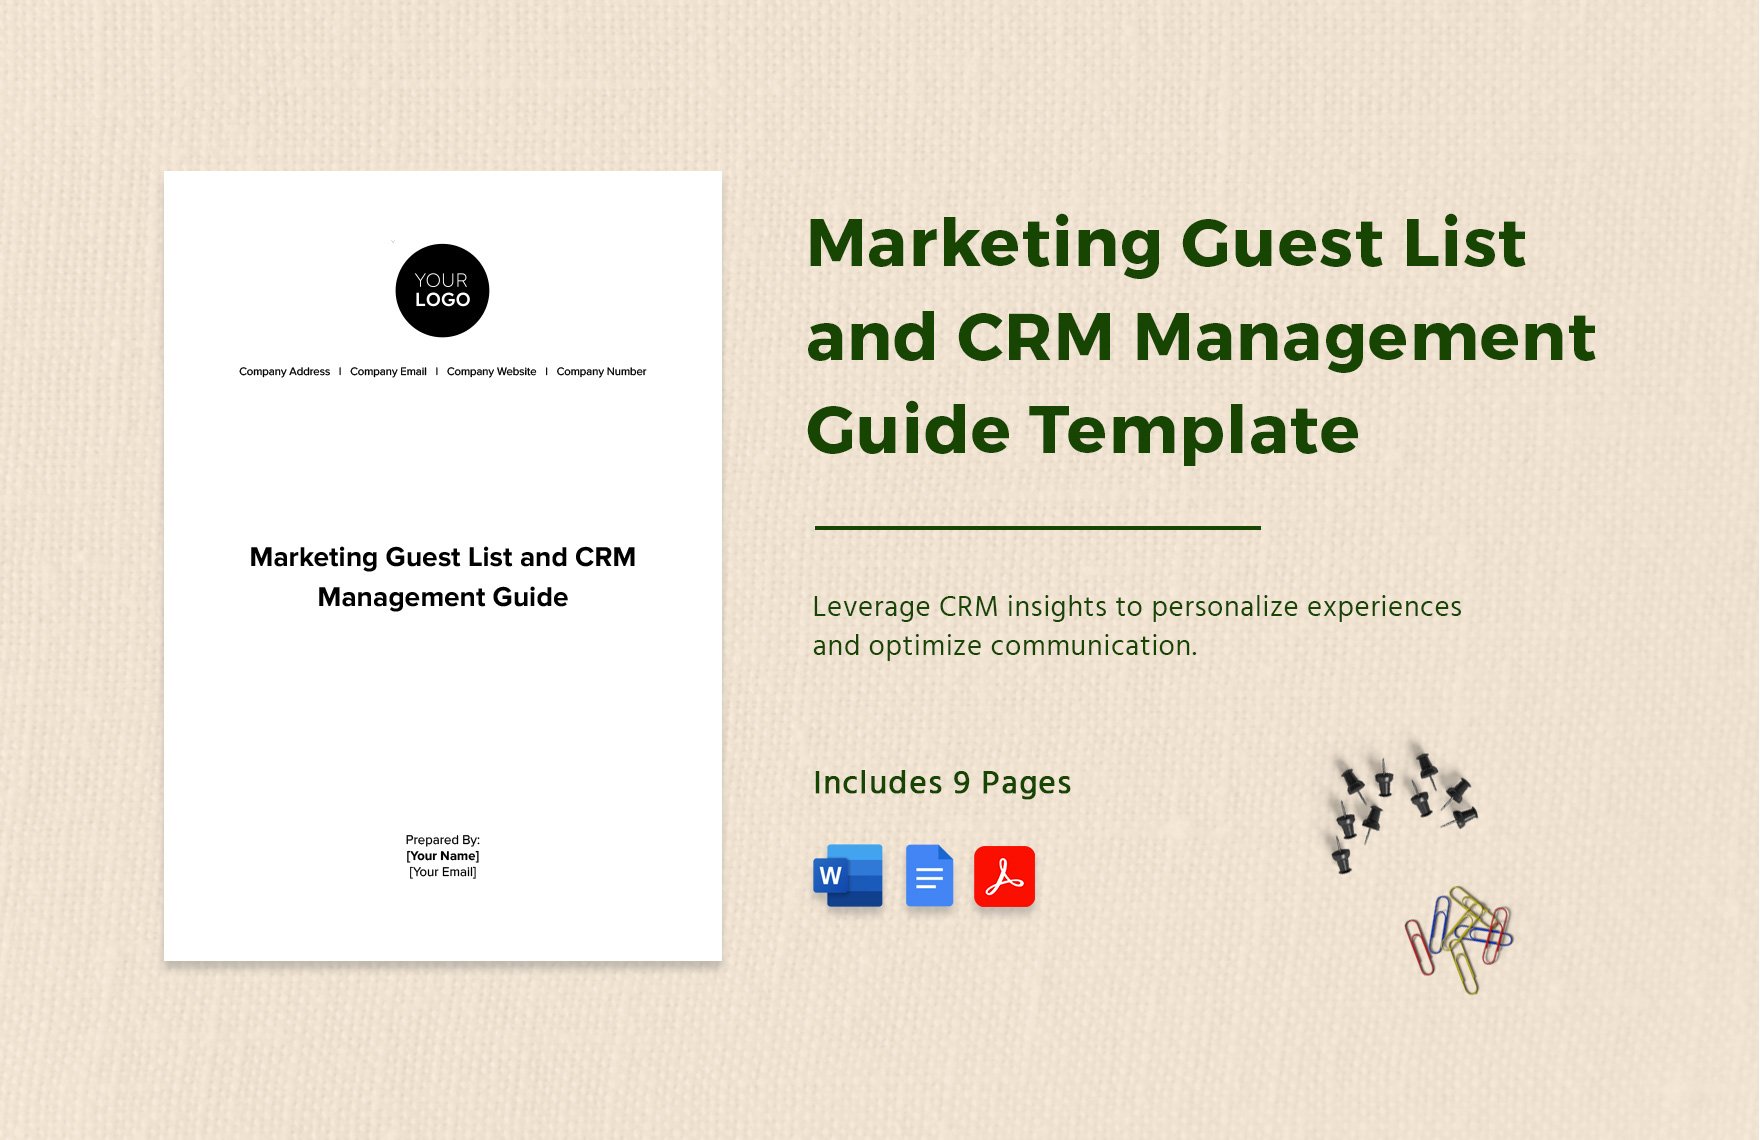 Marketing Guest List and CRM Management Guide Template